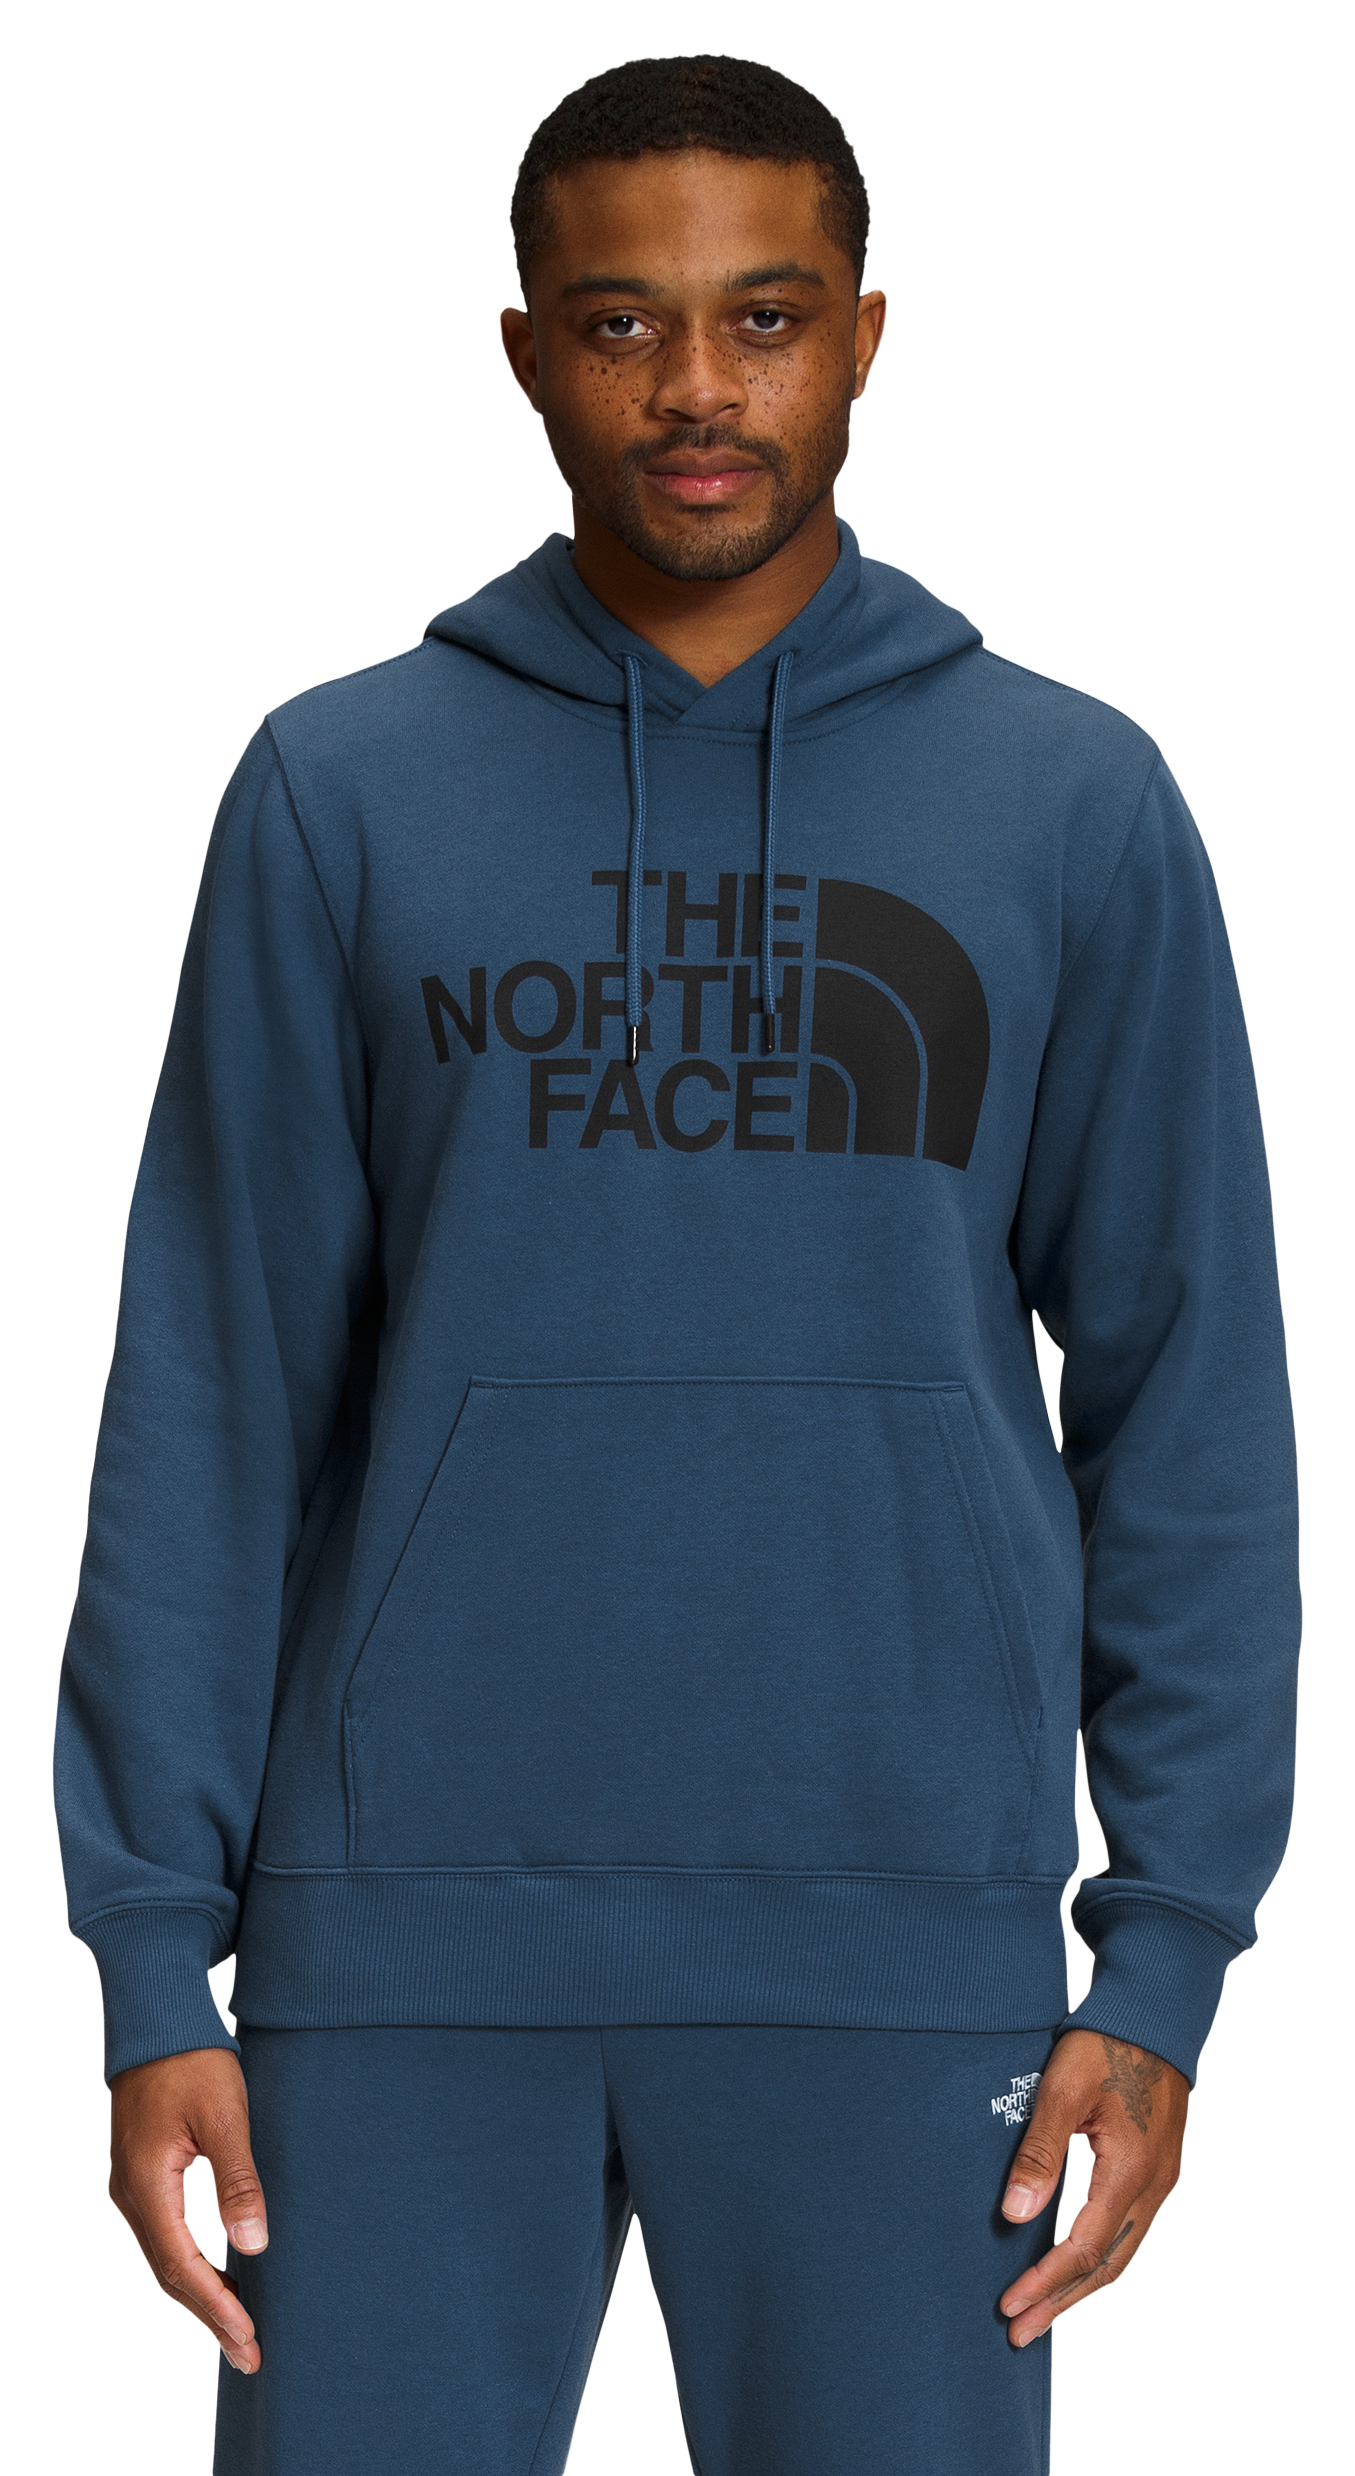 The North Face Half Dome Pullover Long-Sleeve Hoodie for Men - Shady Blue/TNF Black - S